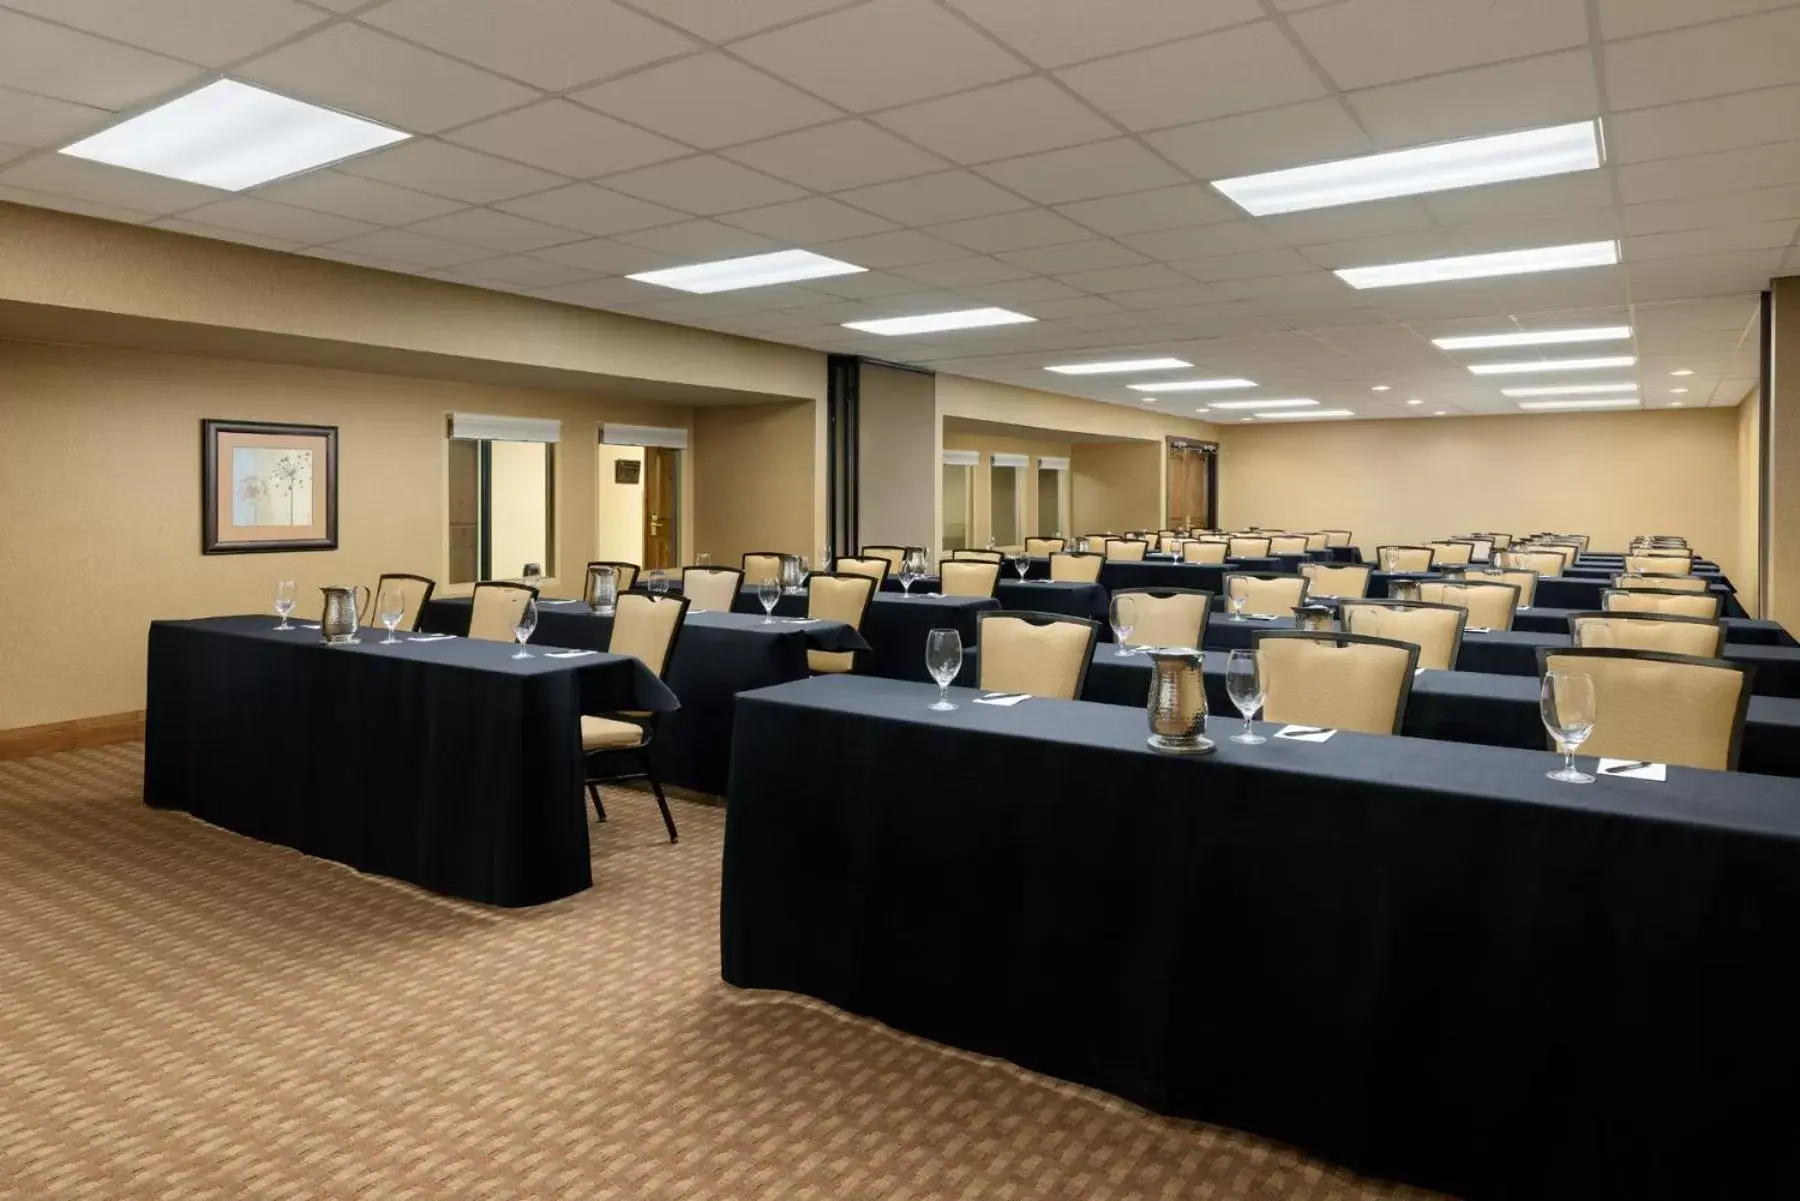 Meeting/conference room in Elevation Hotel & Spa